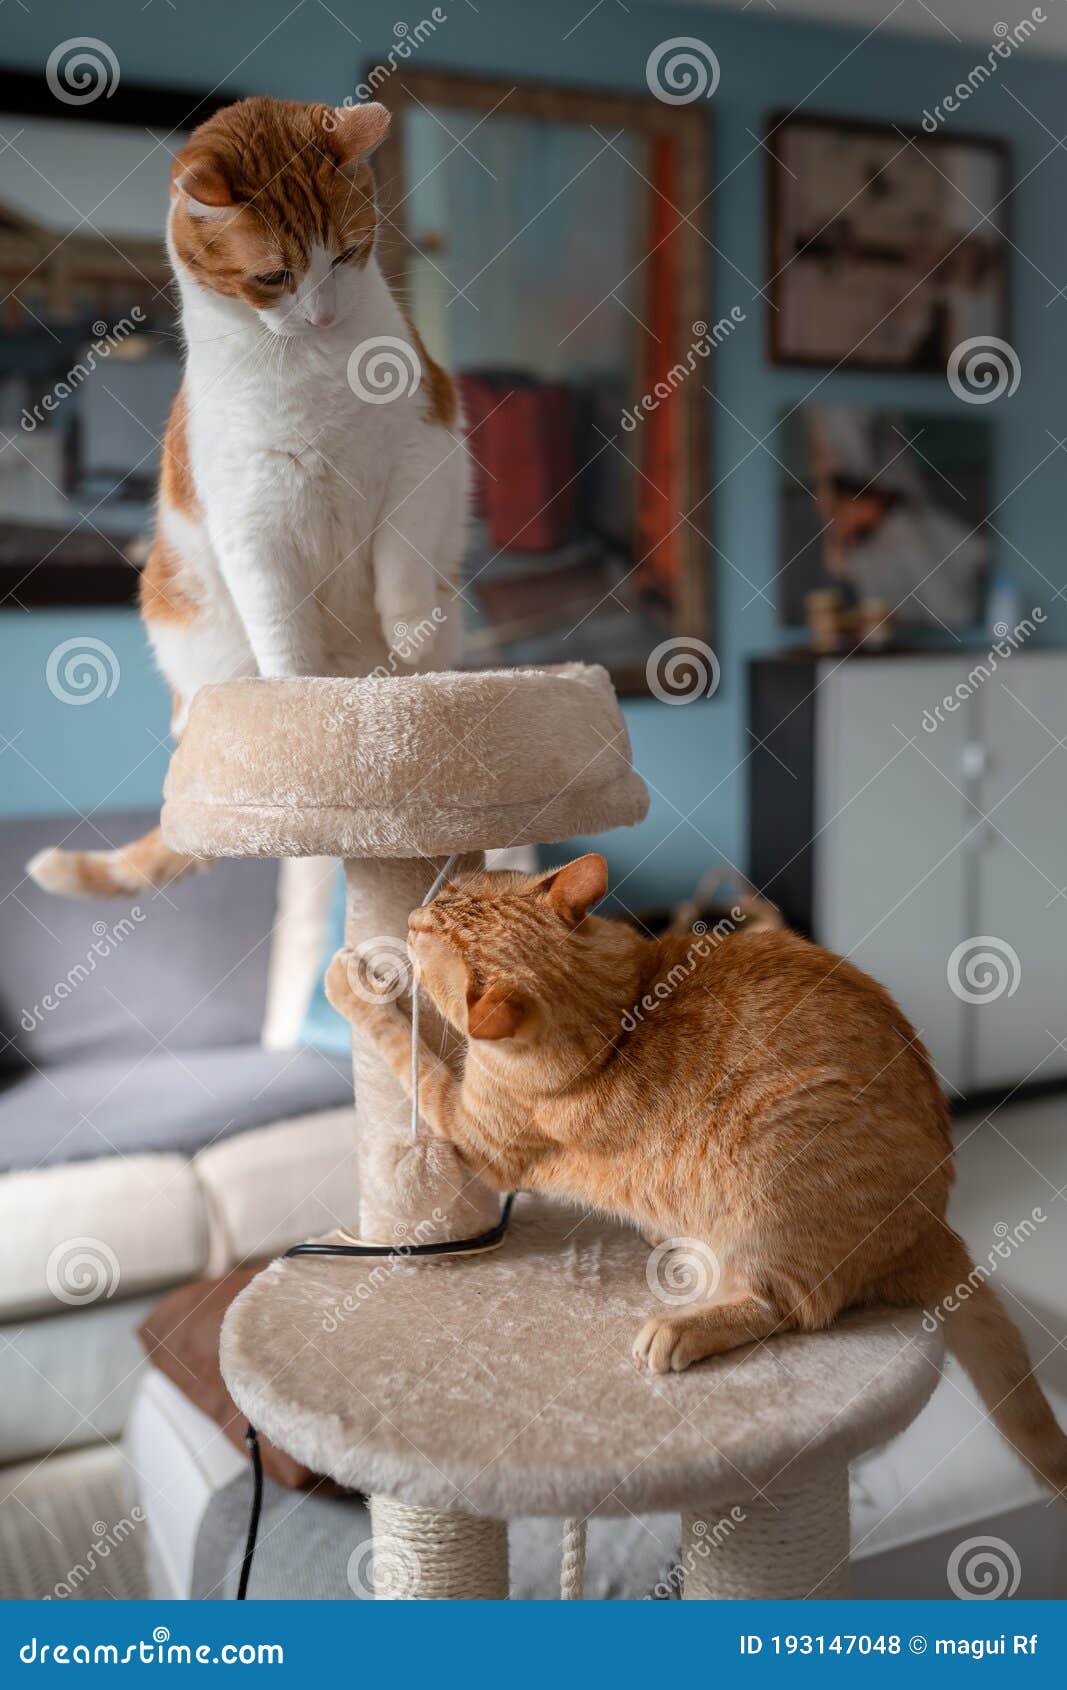 vertical composition. two brown cats play in a scratching tower 2